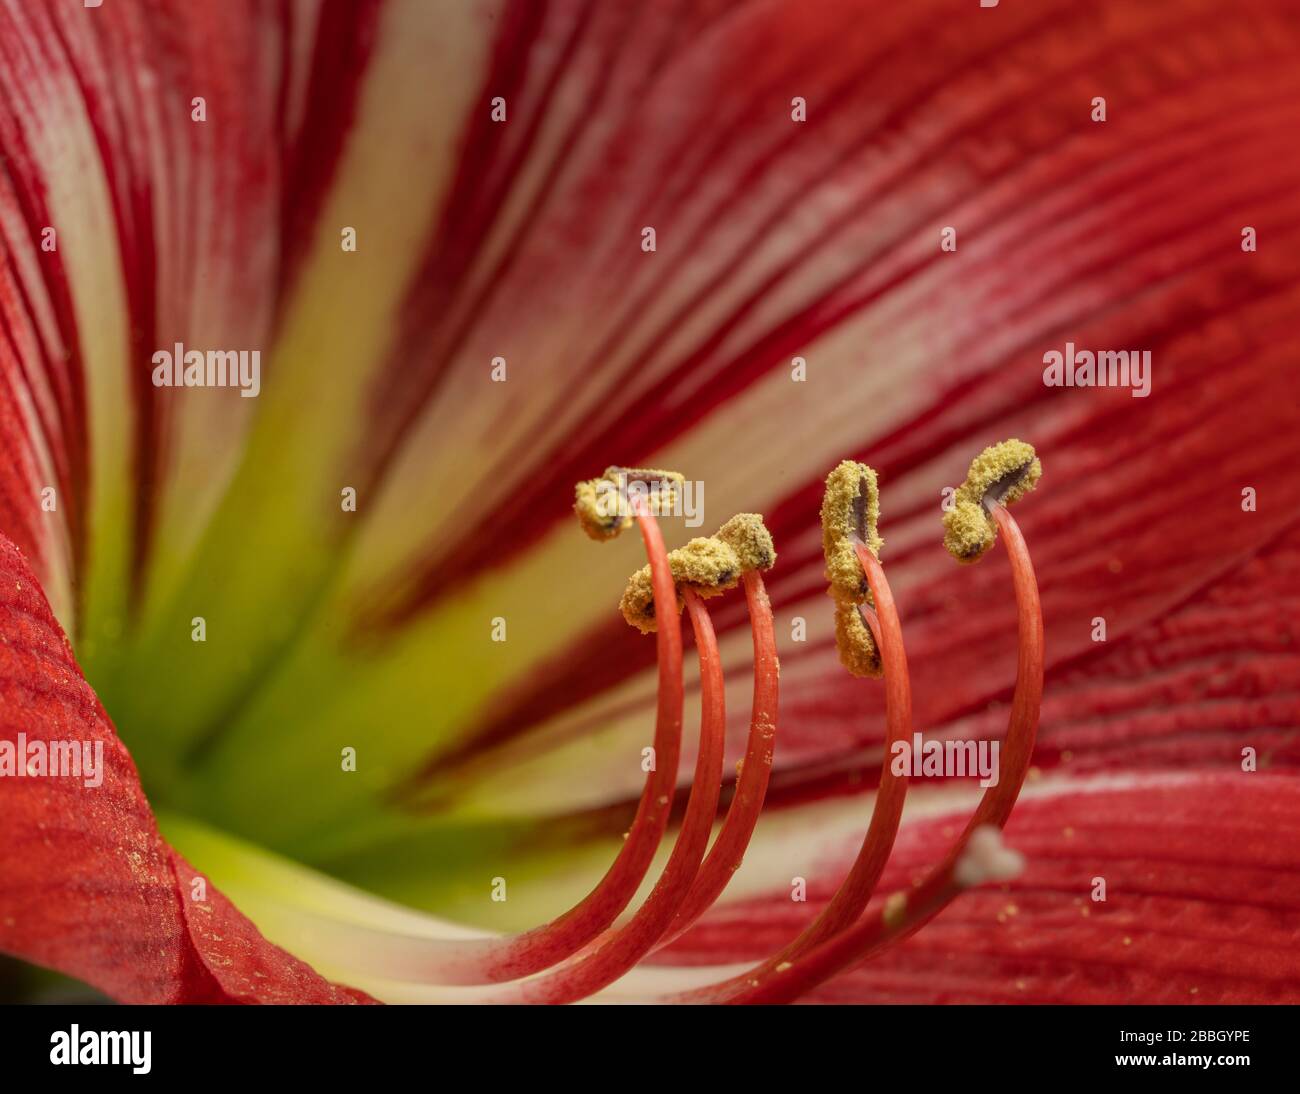 Red amaryllis flower in bloom isolated with stamen in focus  Stock Photo